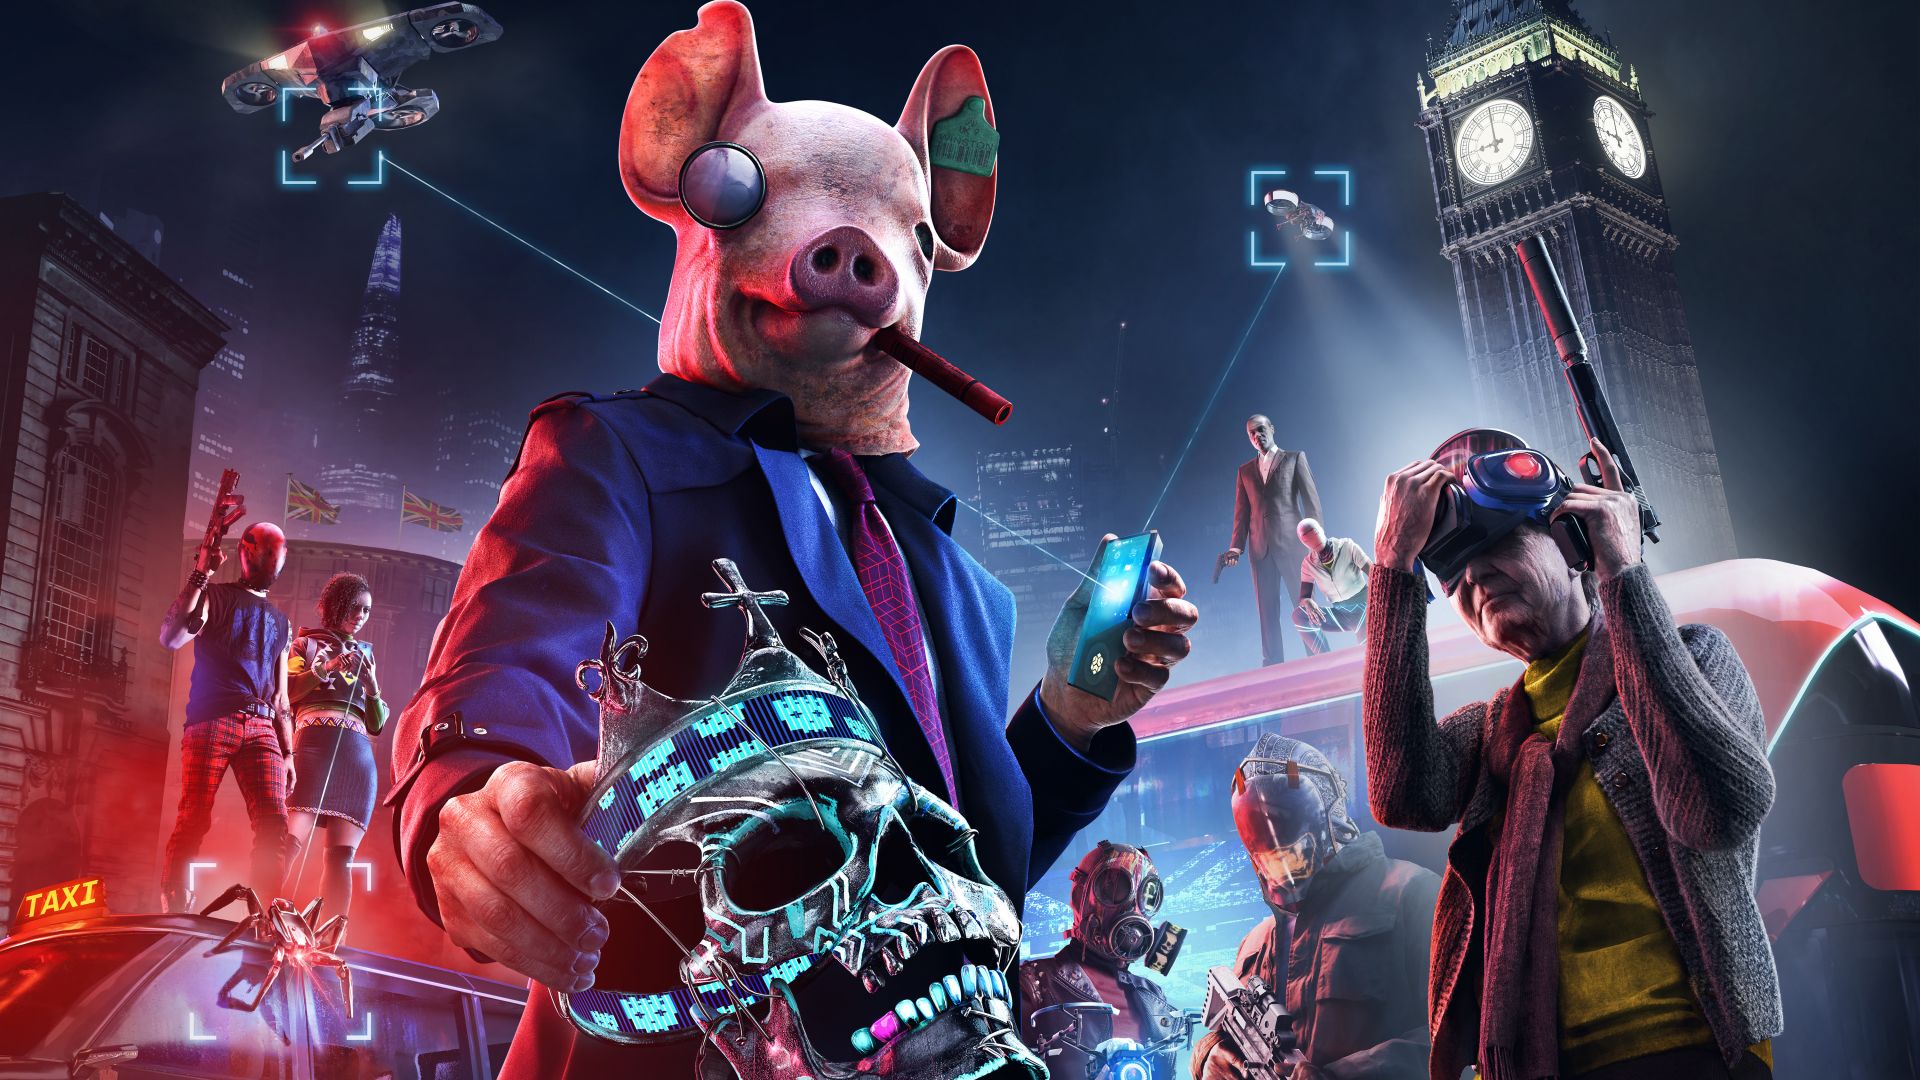 Watch dogs on steam фото 45